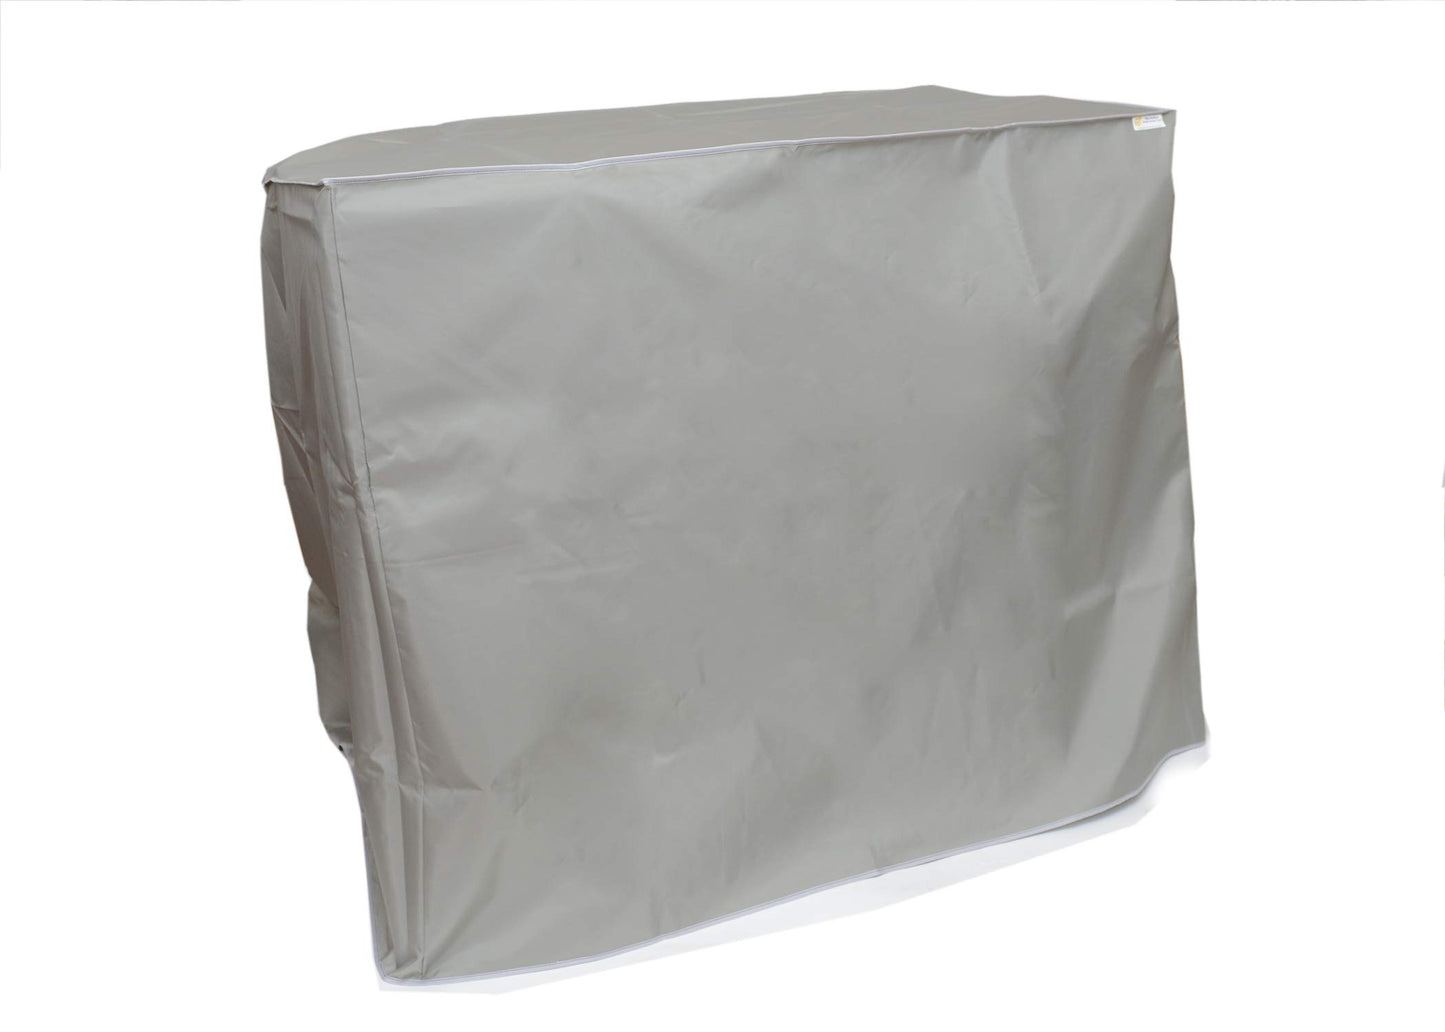 The Perfect Dust Cover, Silver Nylon Nylon Cover for HP Latex 315 54-in Wide Format Inkjet Printer, Anti Static Waterproof Cover, Dimensions 91''W x 33''D x 54''H by The Perfect Dust Cover LLC